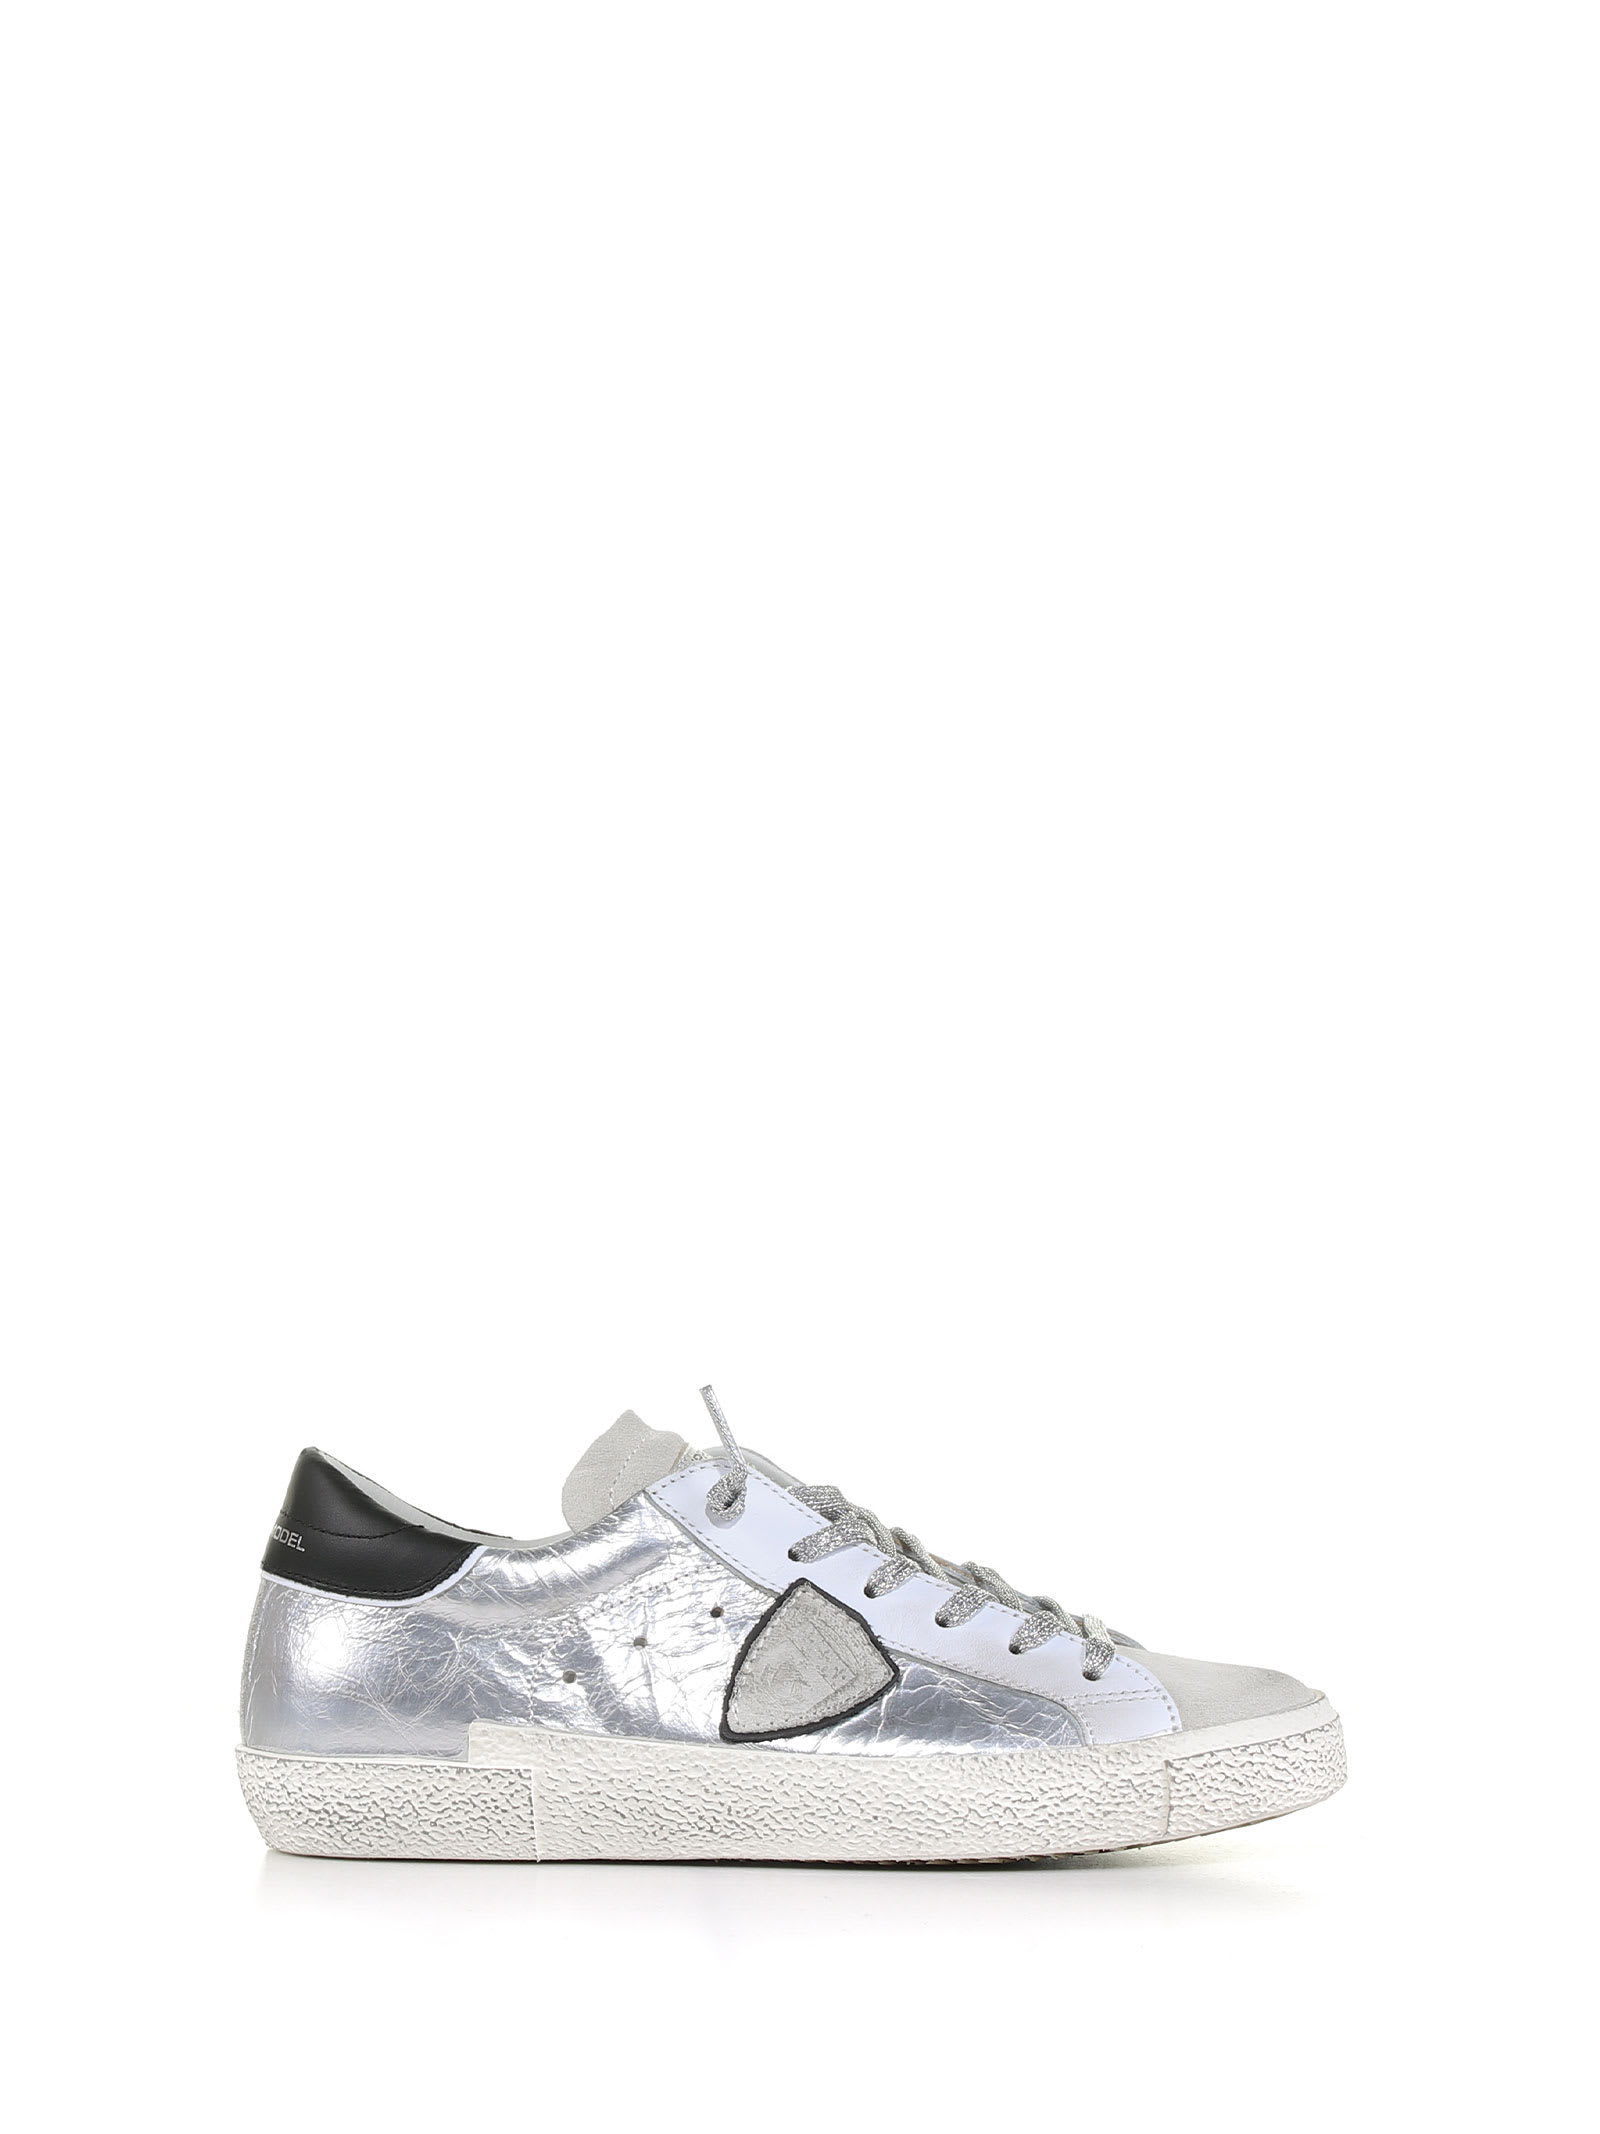 Philippe Model Paris Sneaker In Leather With Suede Details